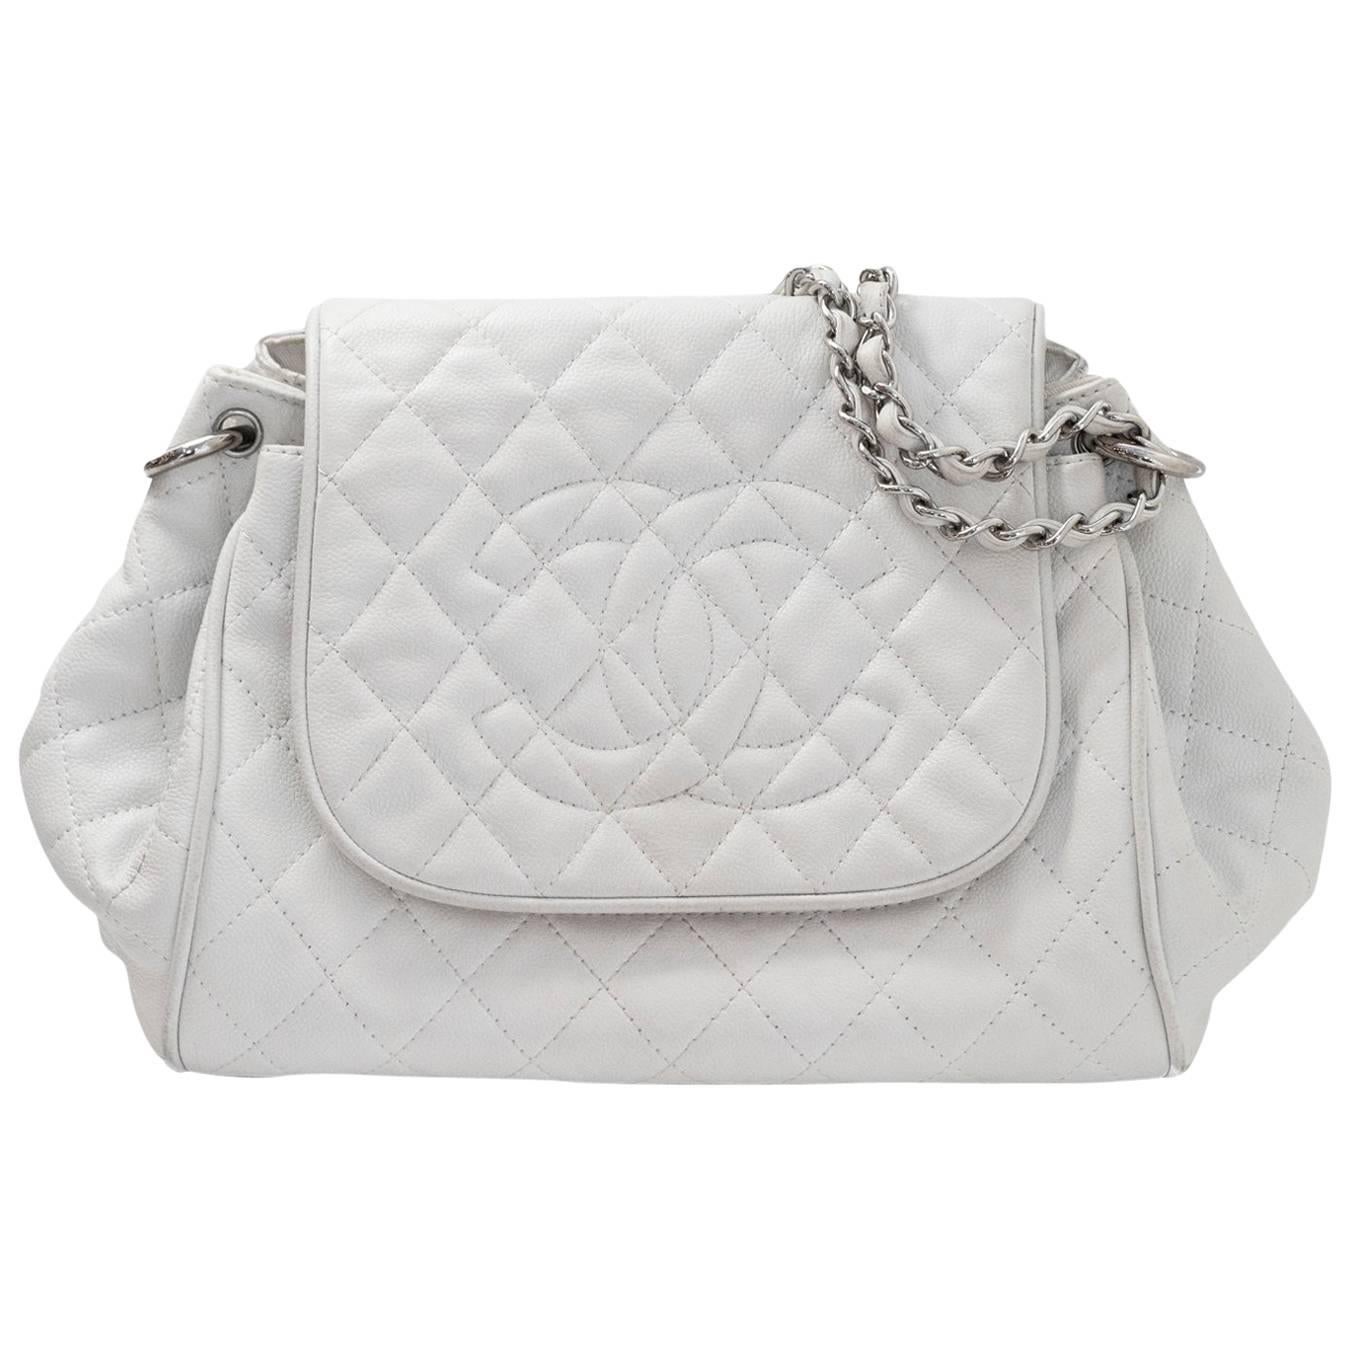 Chanel White Quilted Caviar Timeless Accordion Flap Bag